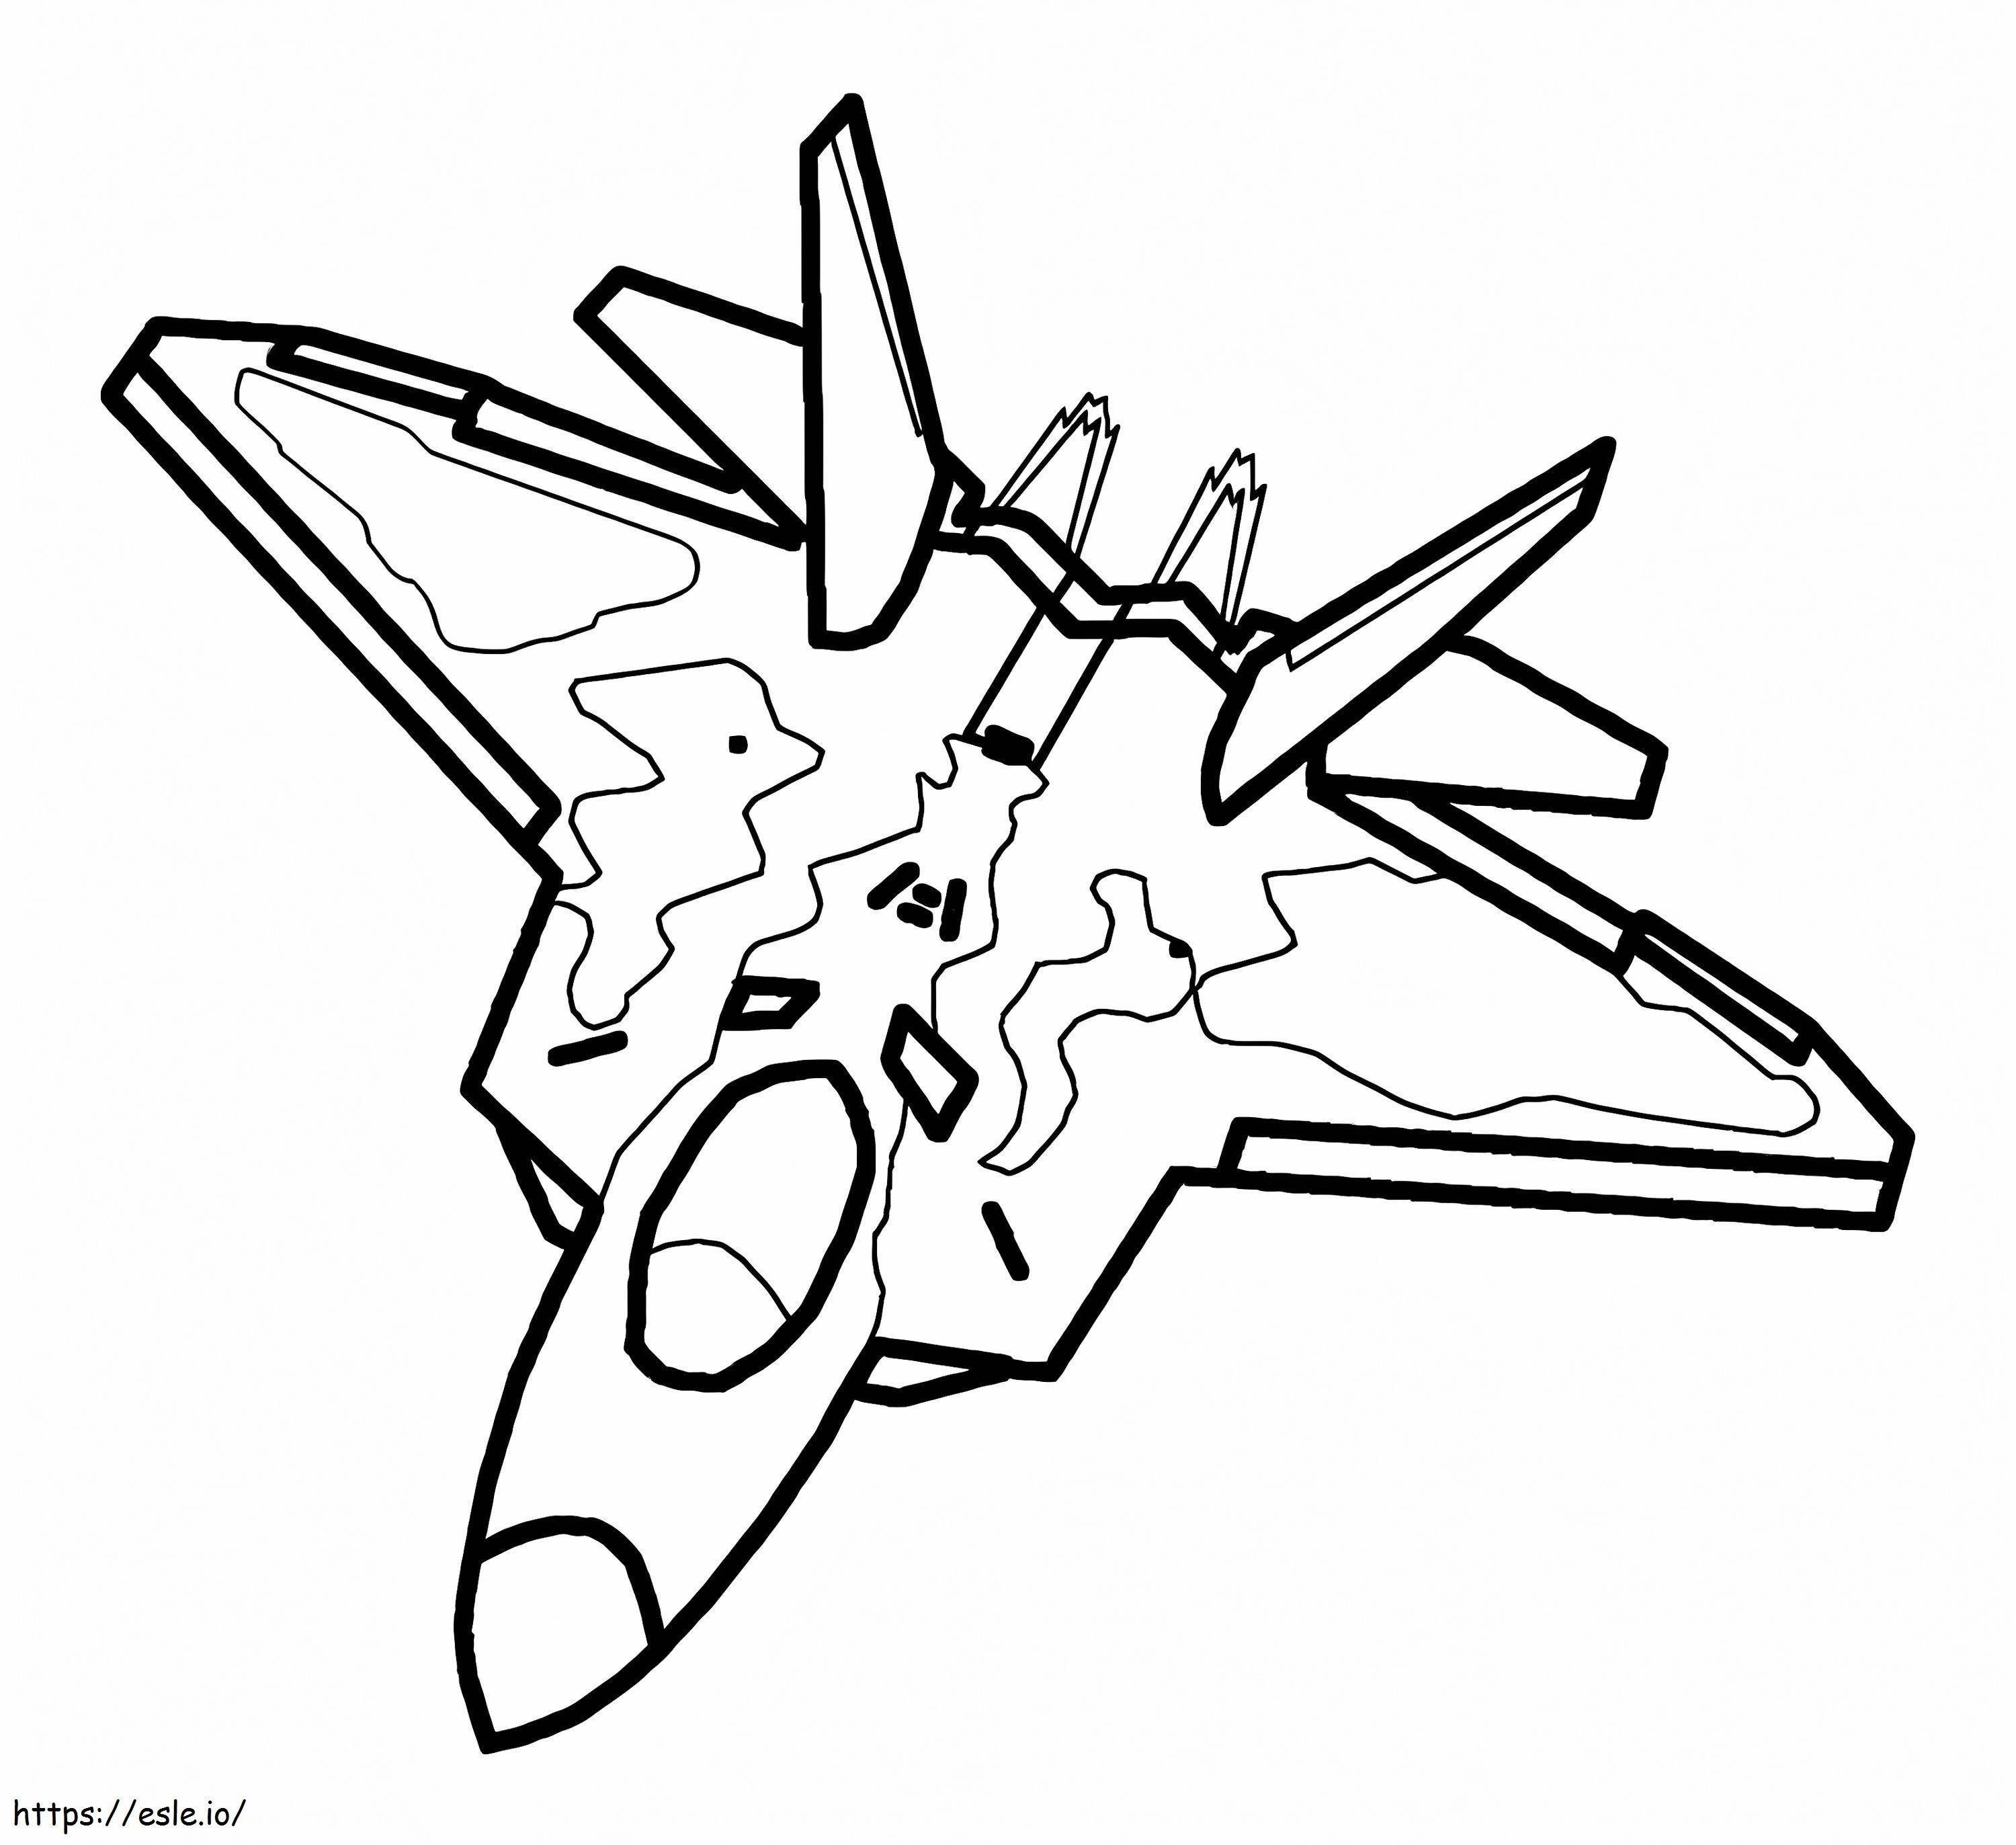 Military Fighter Jet coloring page